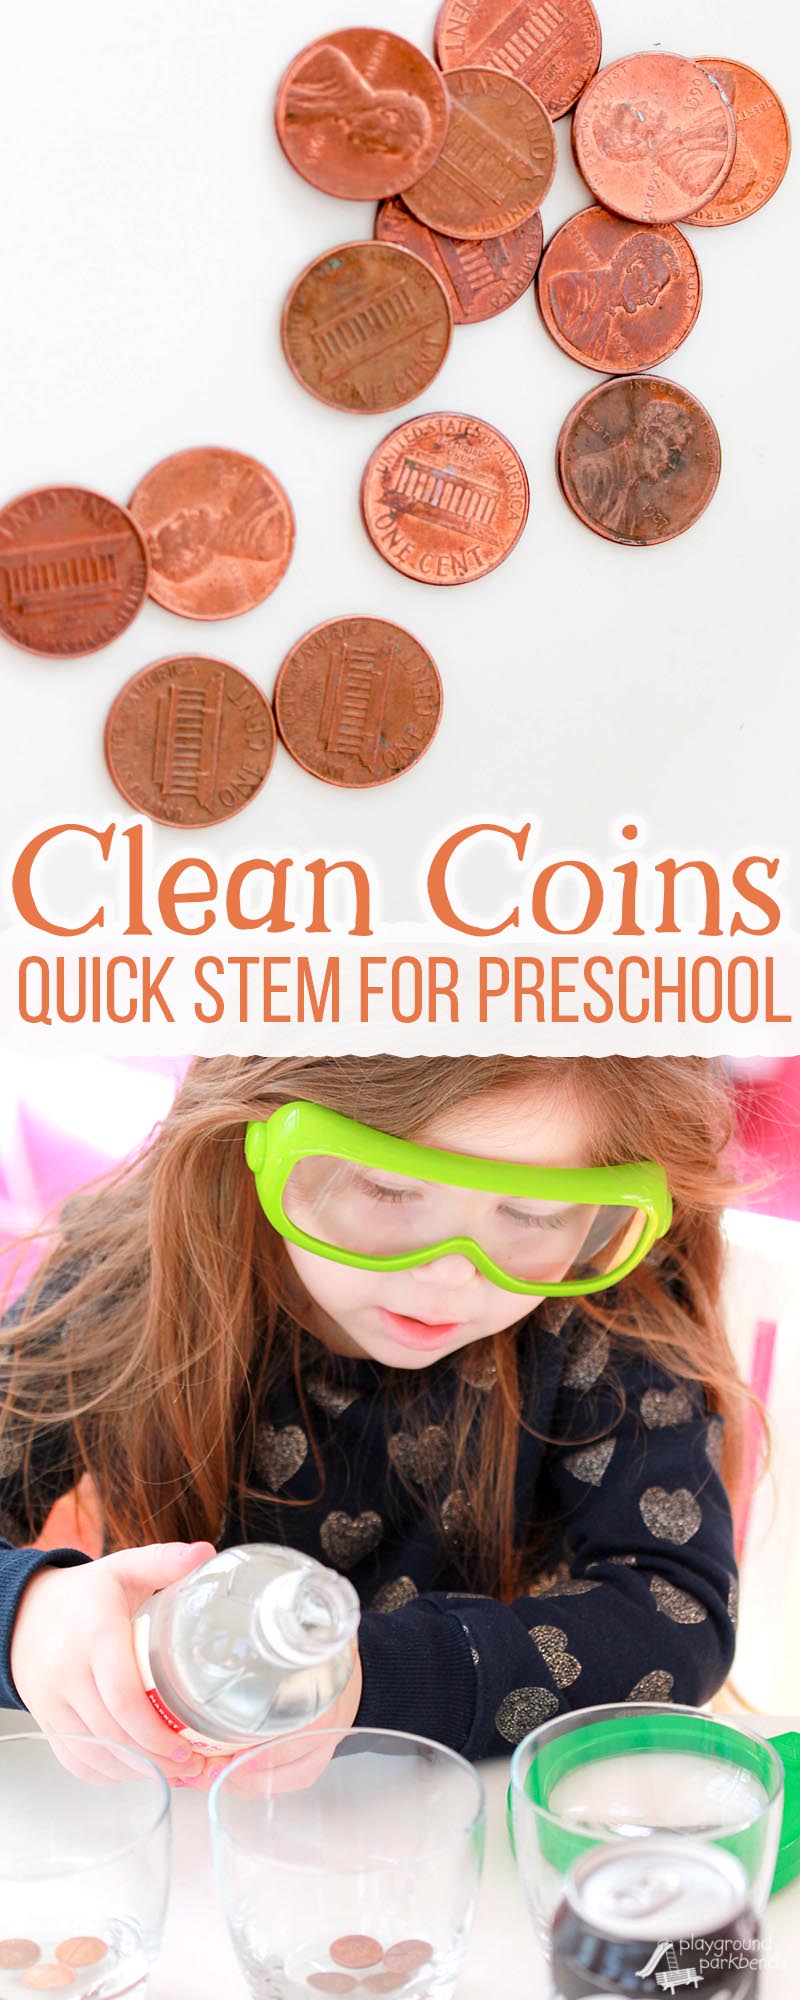 What liquid will clean coins best? A simple science experiment for preschoolers to introduce the scientific method - ask a question, make a guess, test, and review your results. | Preschool | STEM | STEAM | Science Project | Money | Kids Activities |